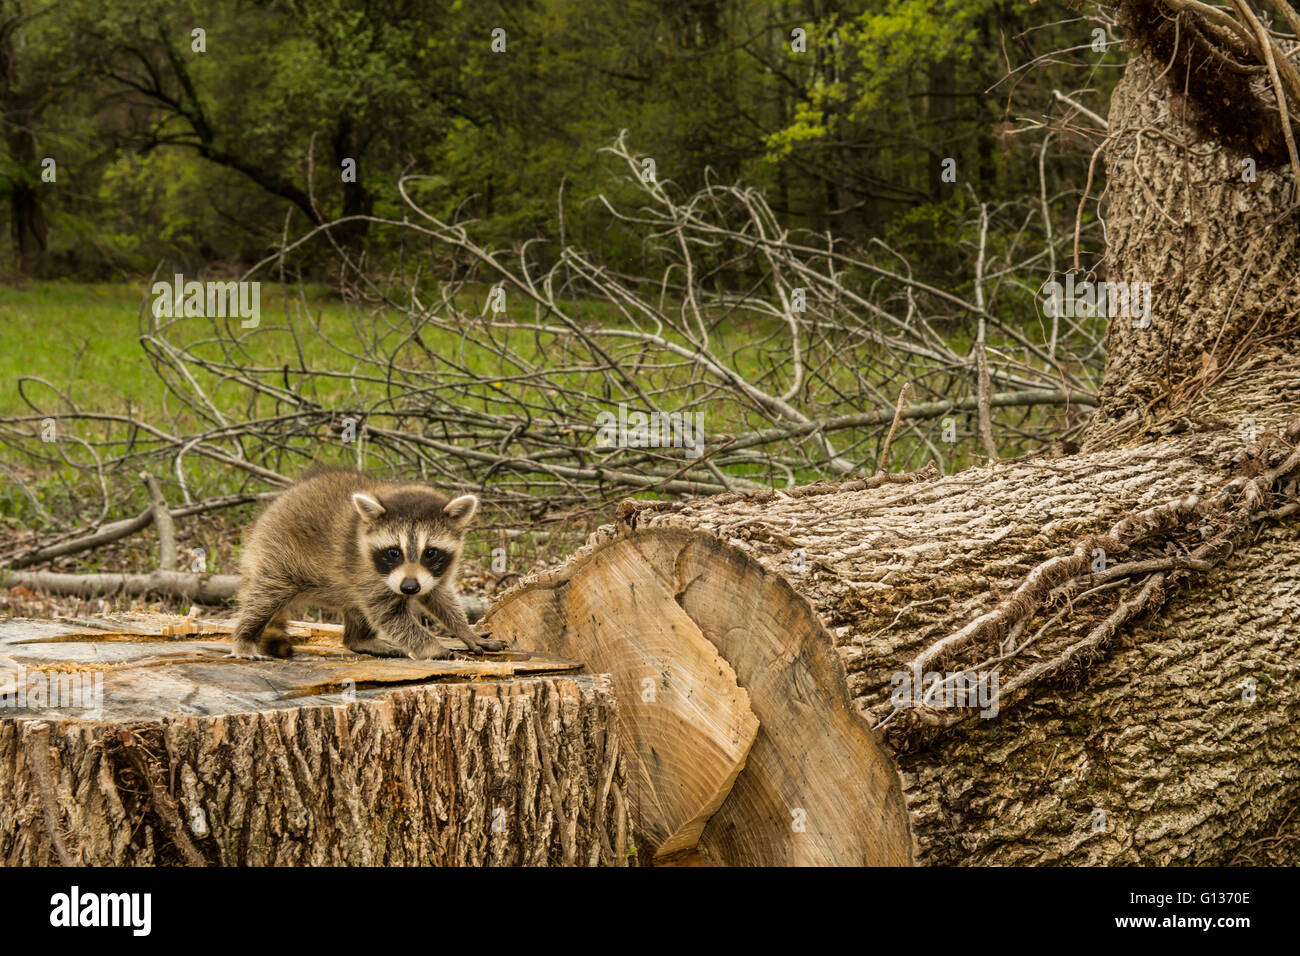 Negative effects of deforestation. A baby raccoon searching for his family after clear cutting the forest. Stock Photo